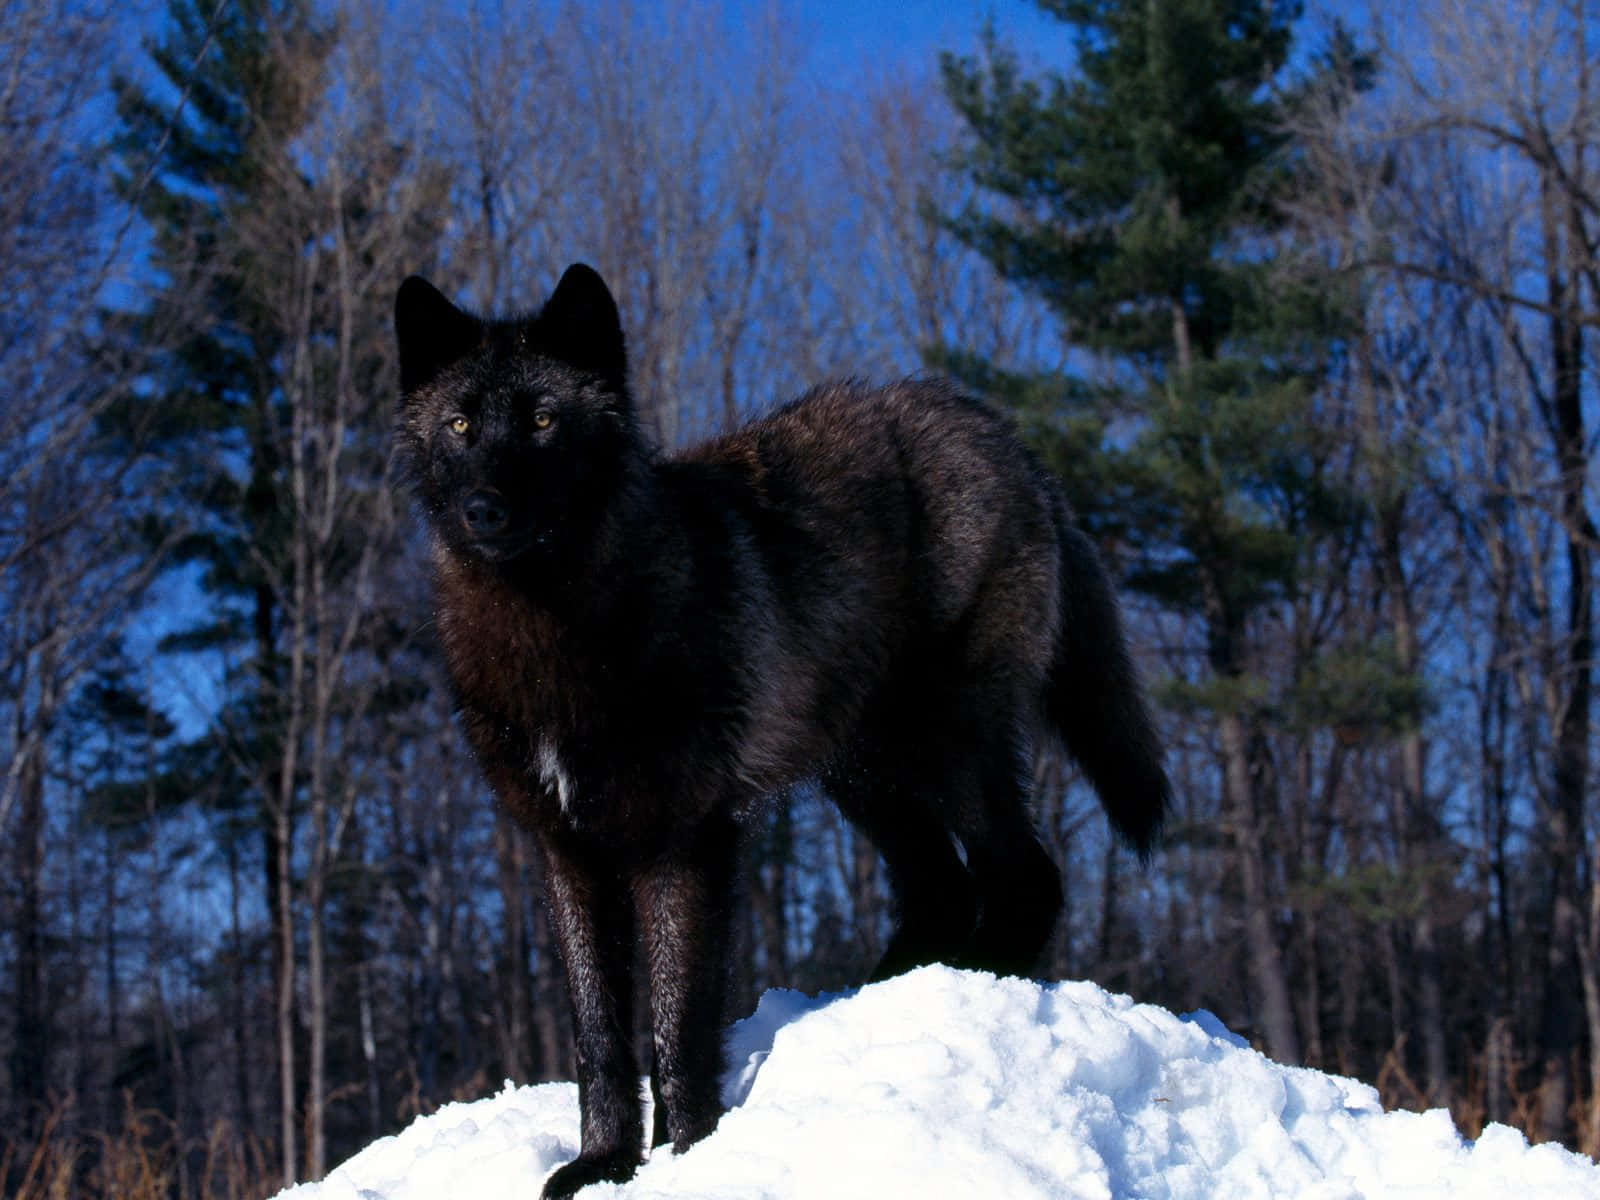 Stare into the darkness and find courage with the Black Wolf